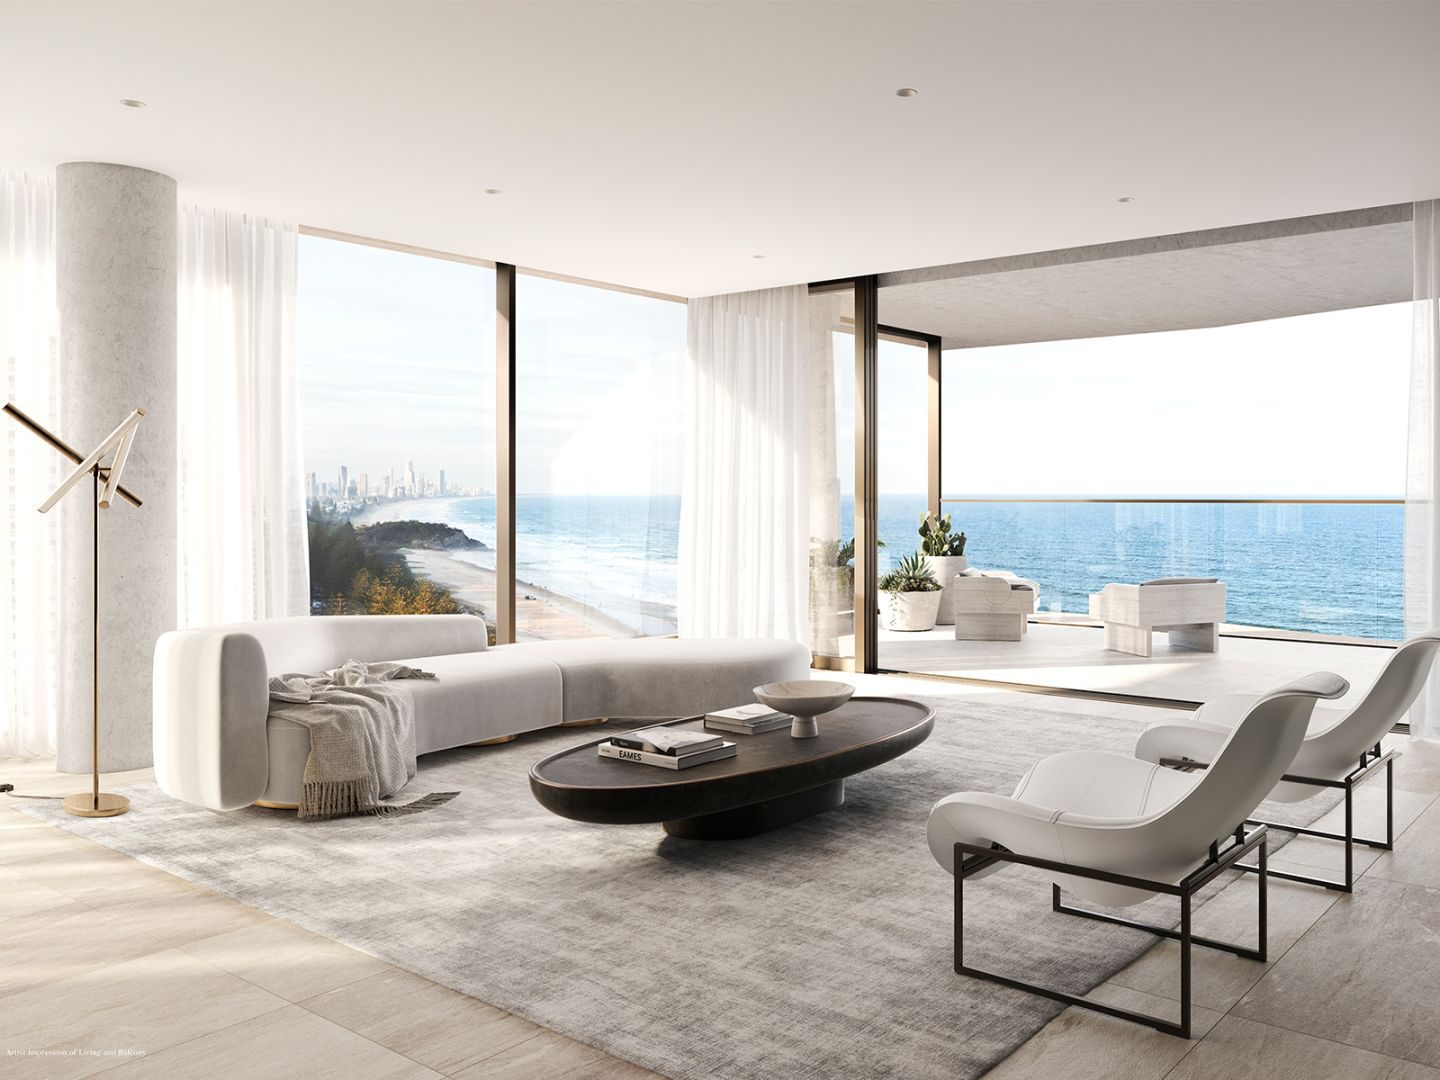 Natura Living Room (render supplied by the developer)